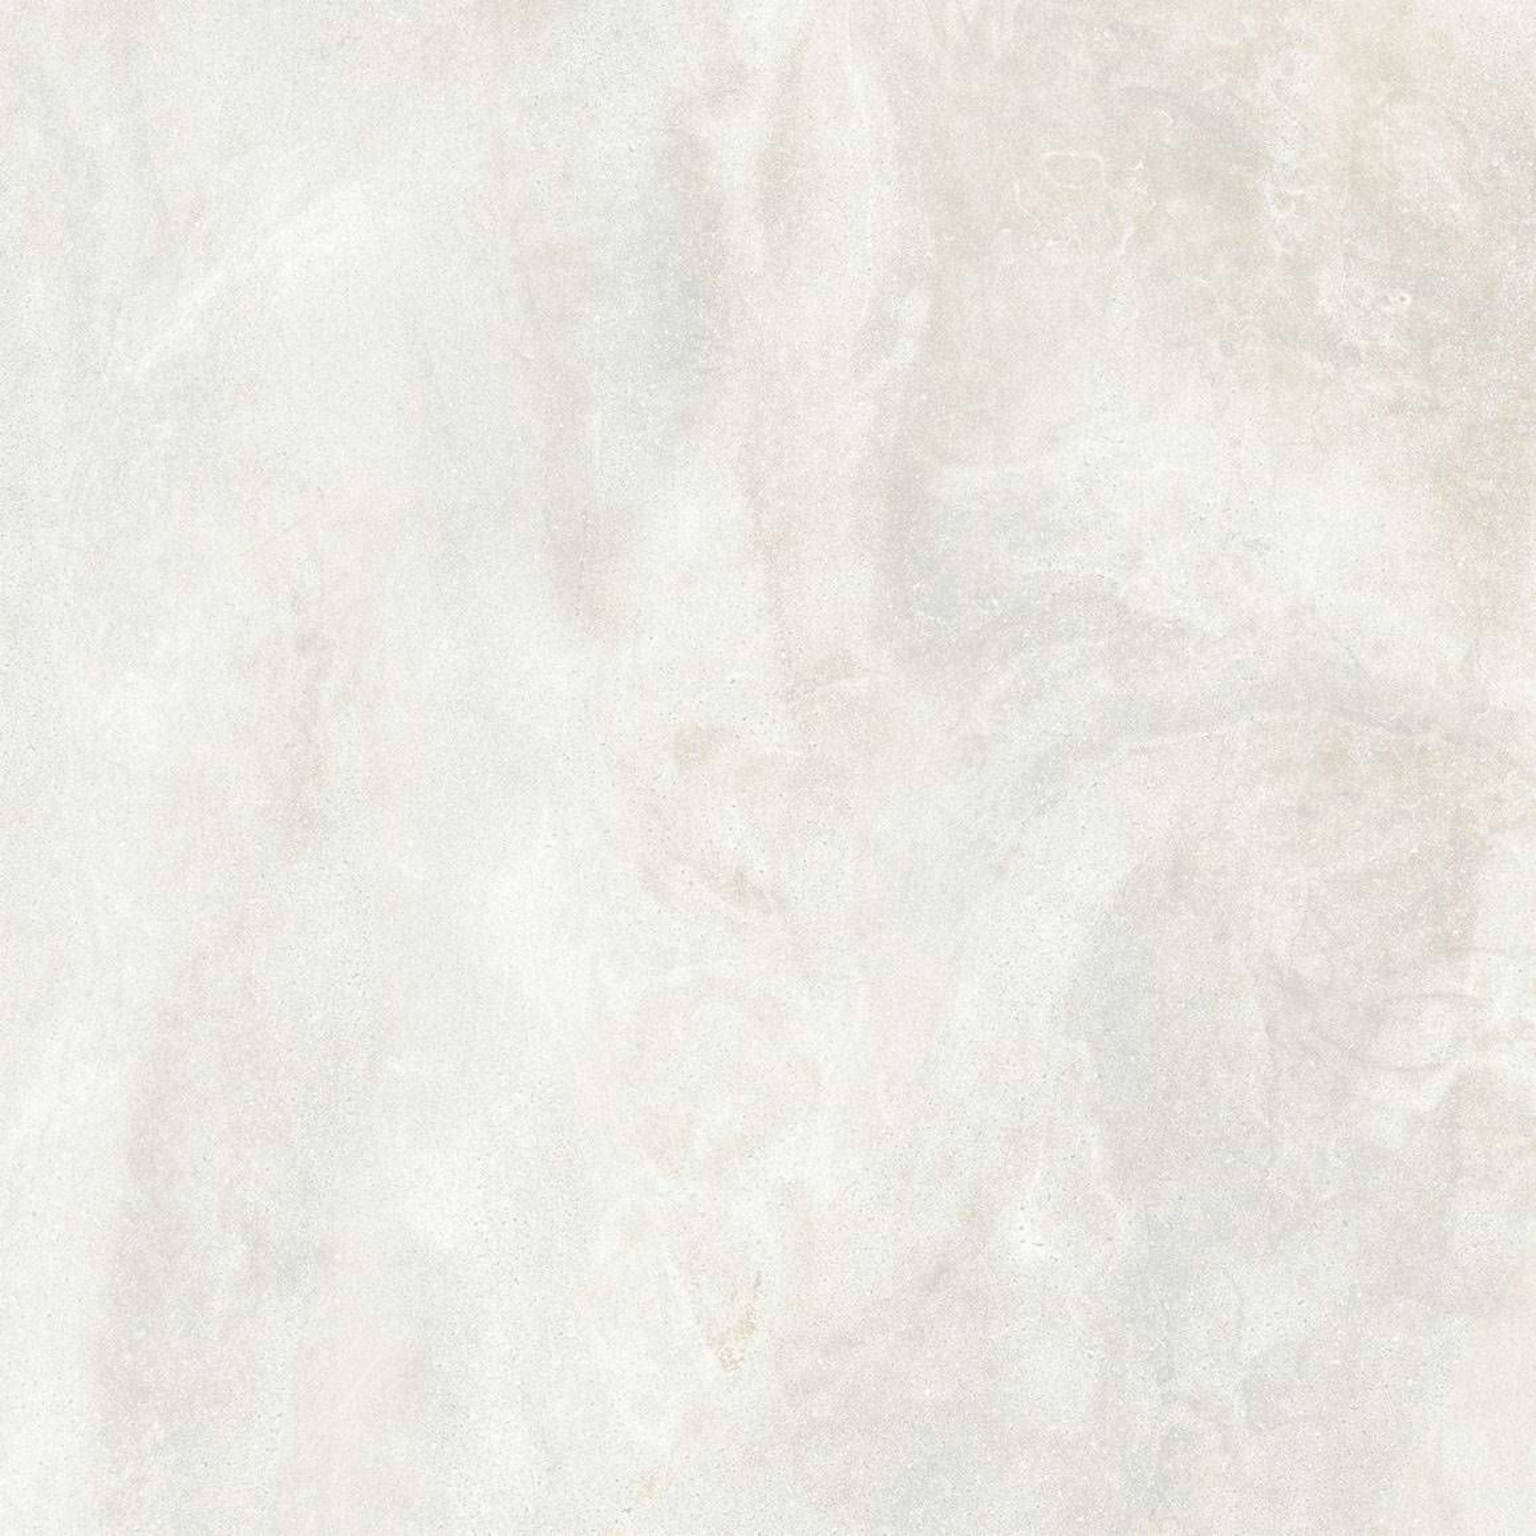 Nilo White Polished | Stones & More | Finest selection of Mosaics, Glass, Tile and Stone